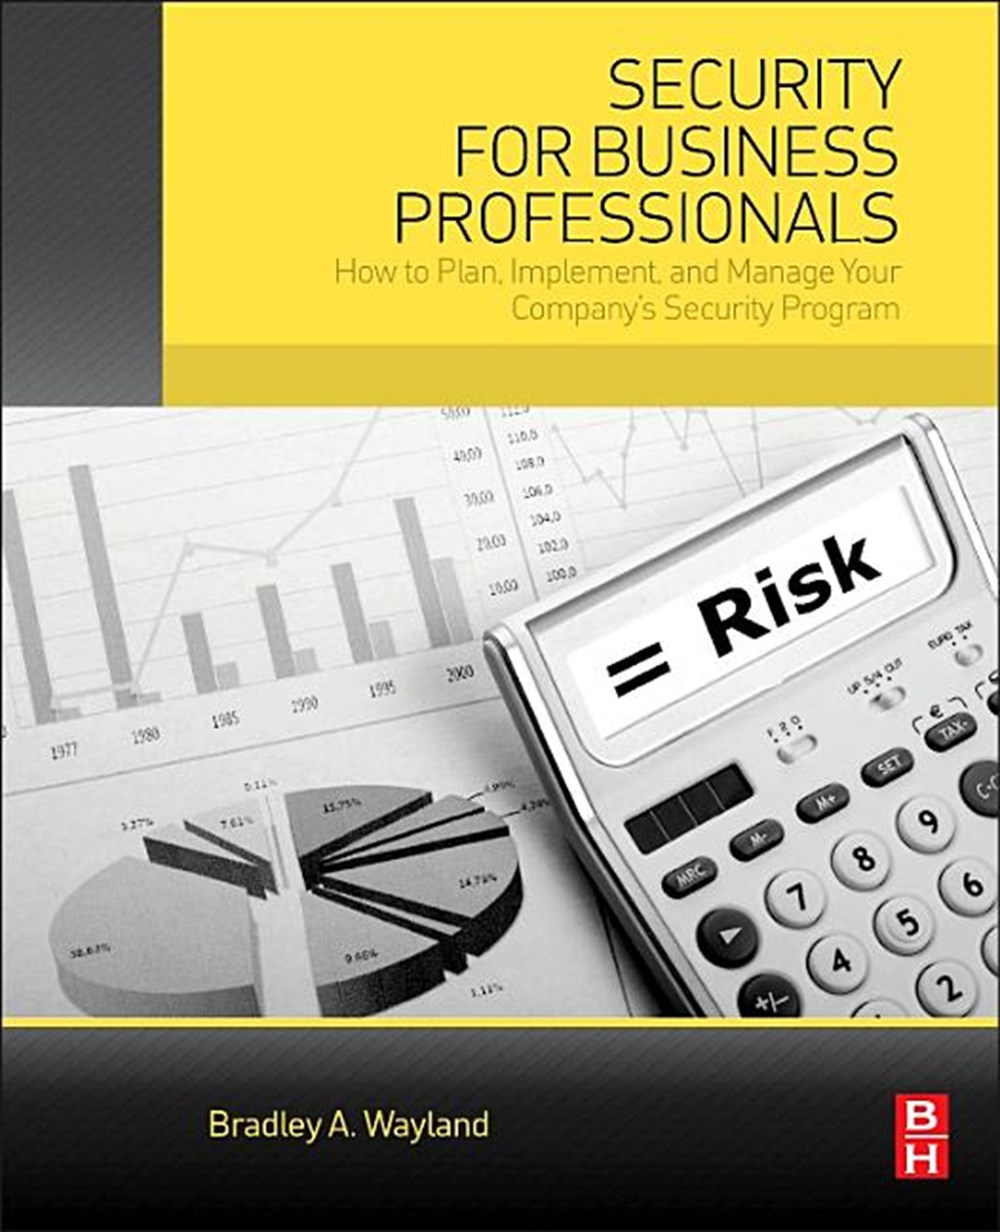 Security for Business Professionals: How to Plan, Implement, and Manage Your Company's Security Prog